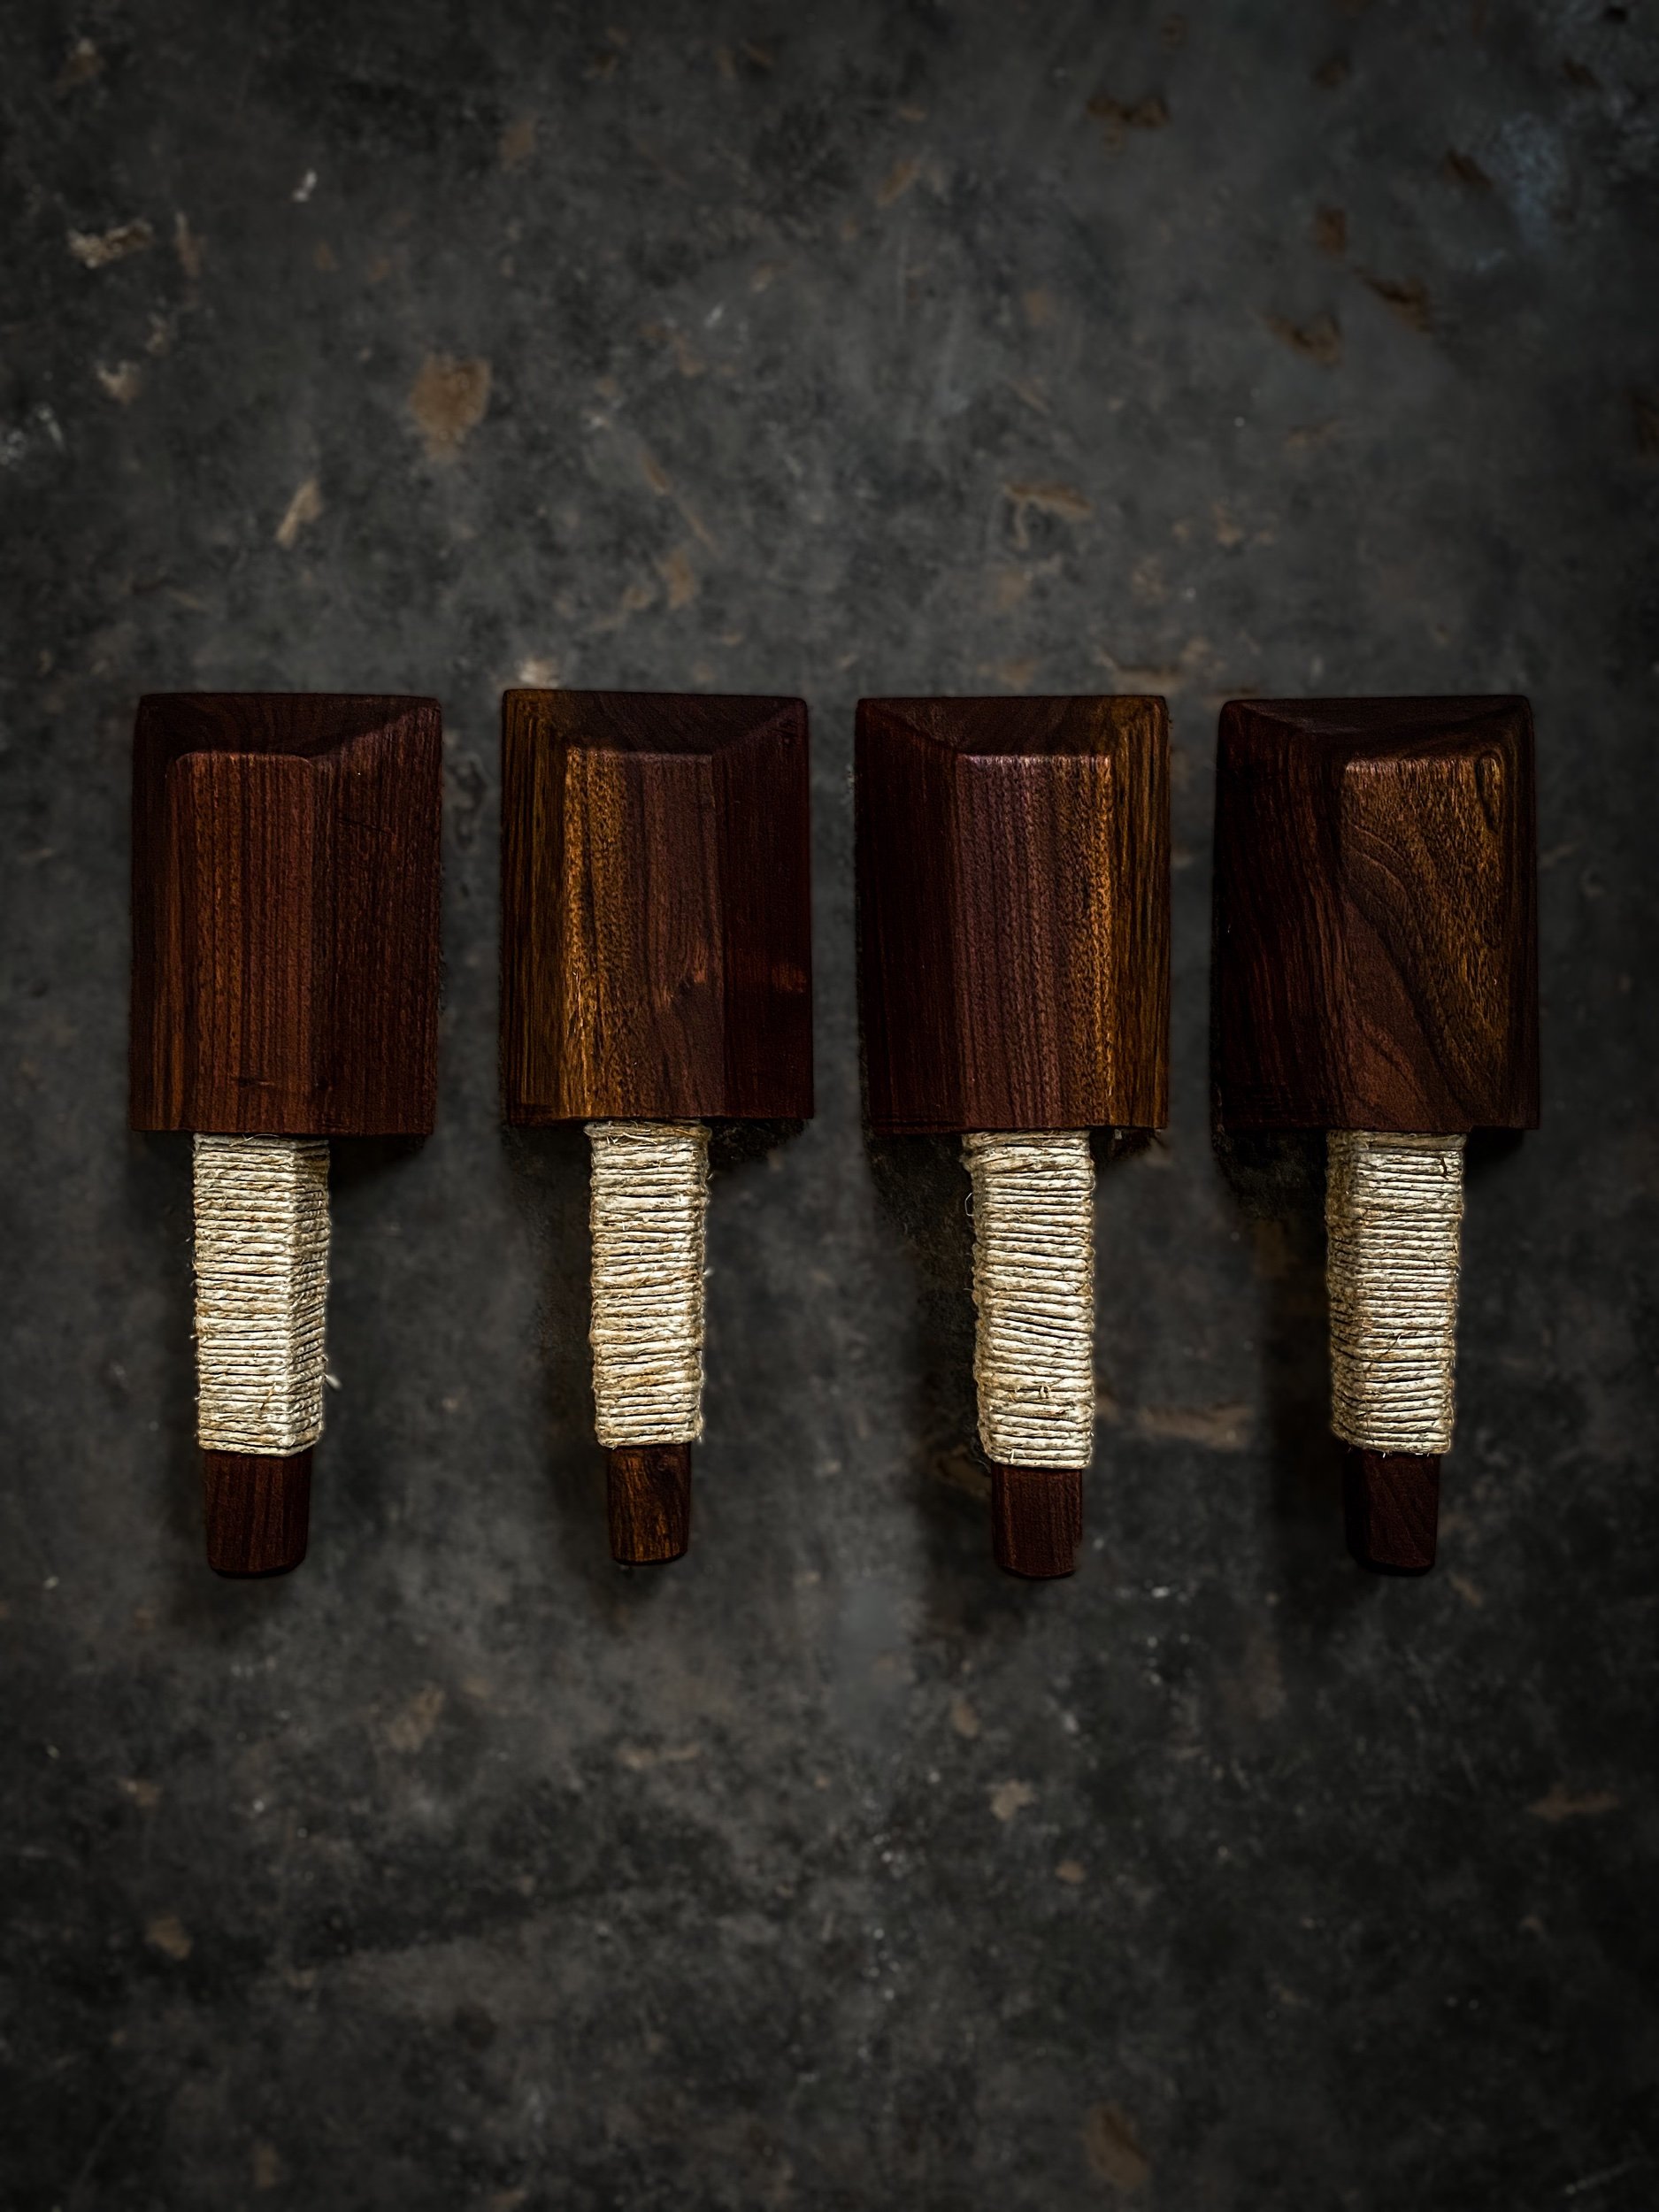 RAW BLACK WALNUT PADDLES, showing variations in color + grain.